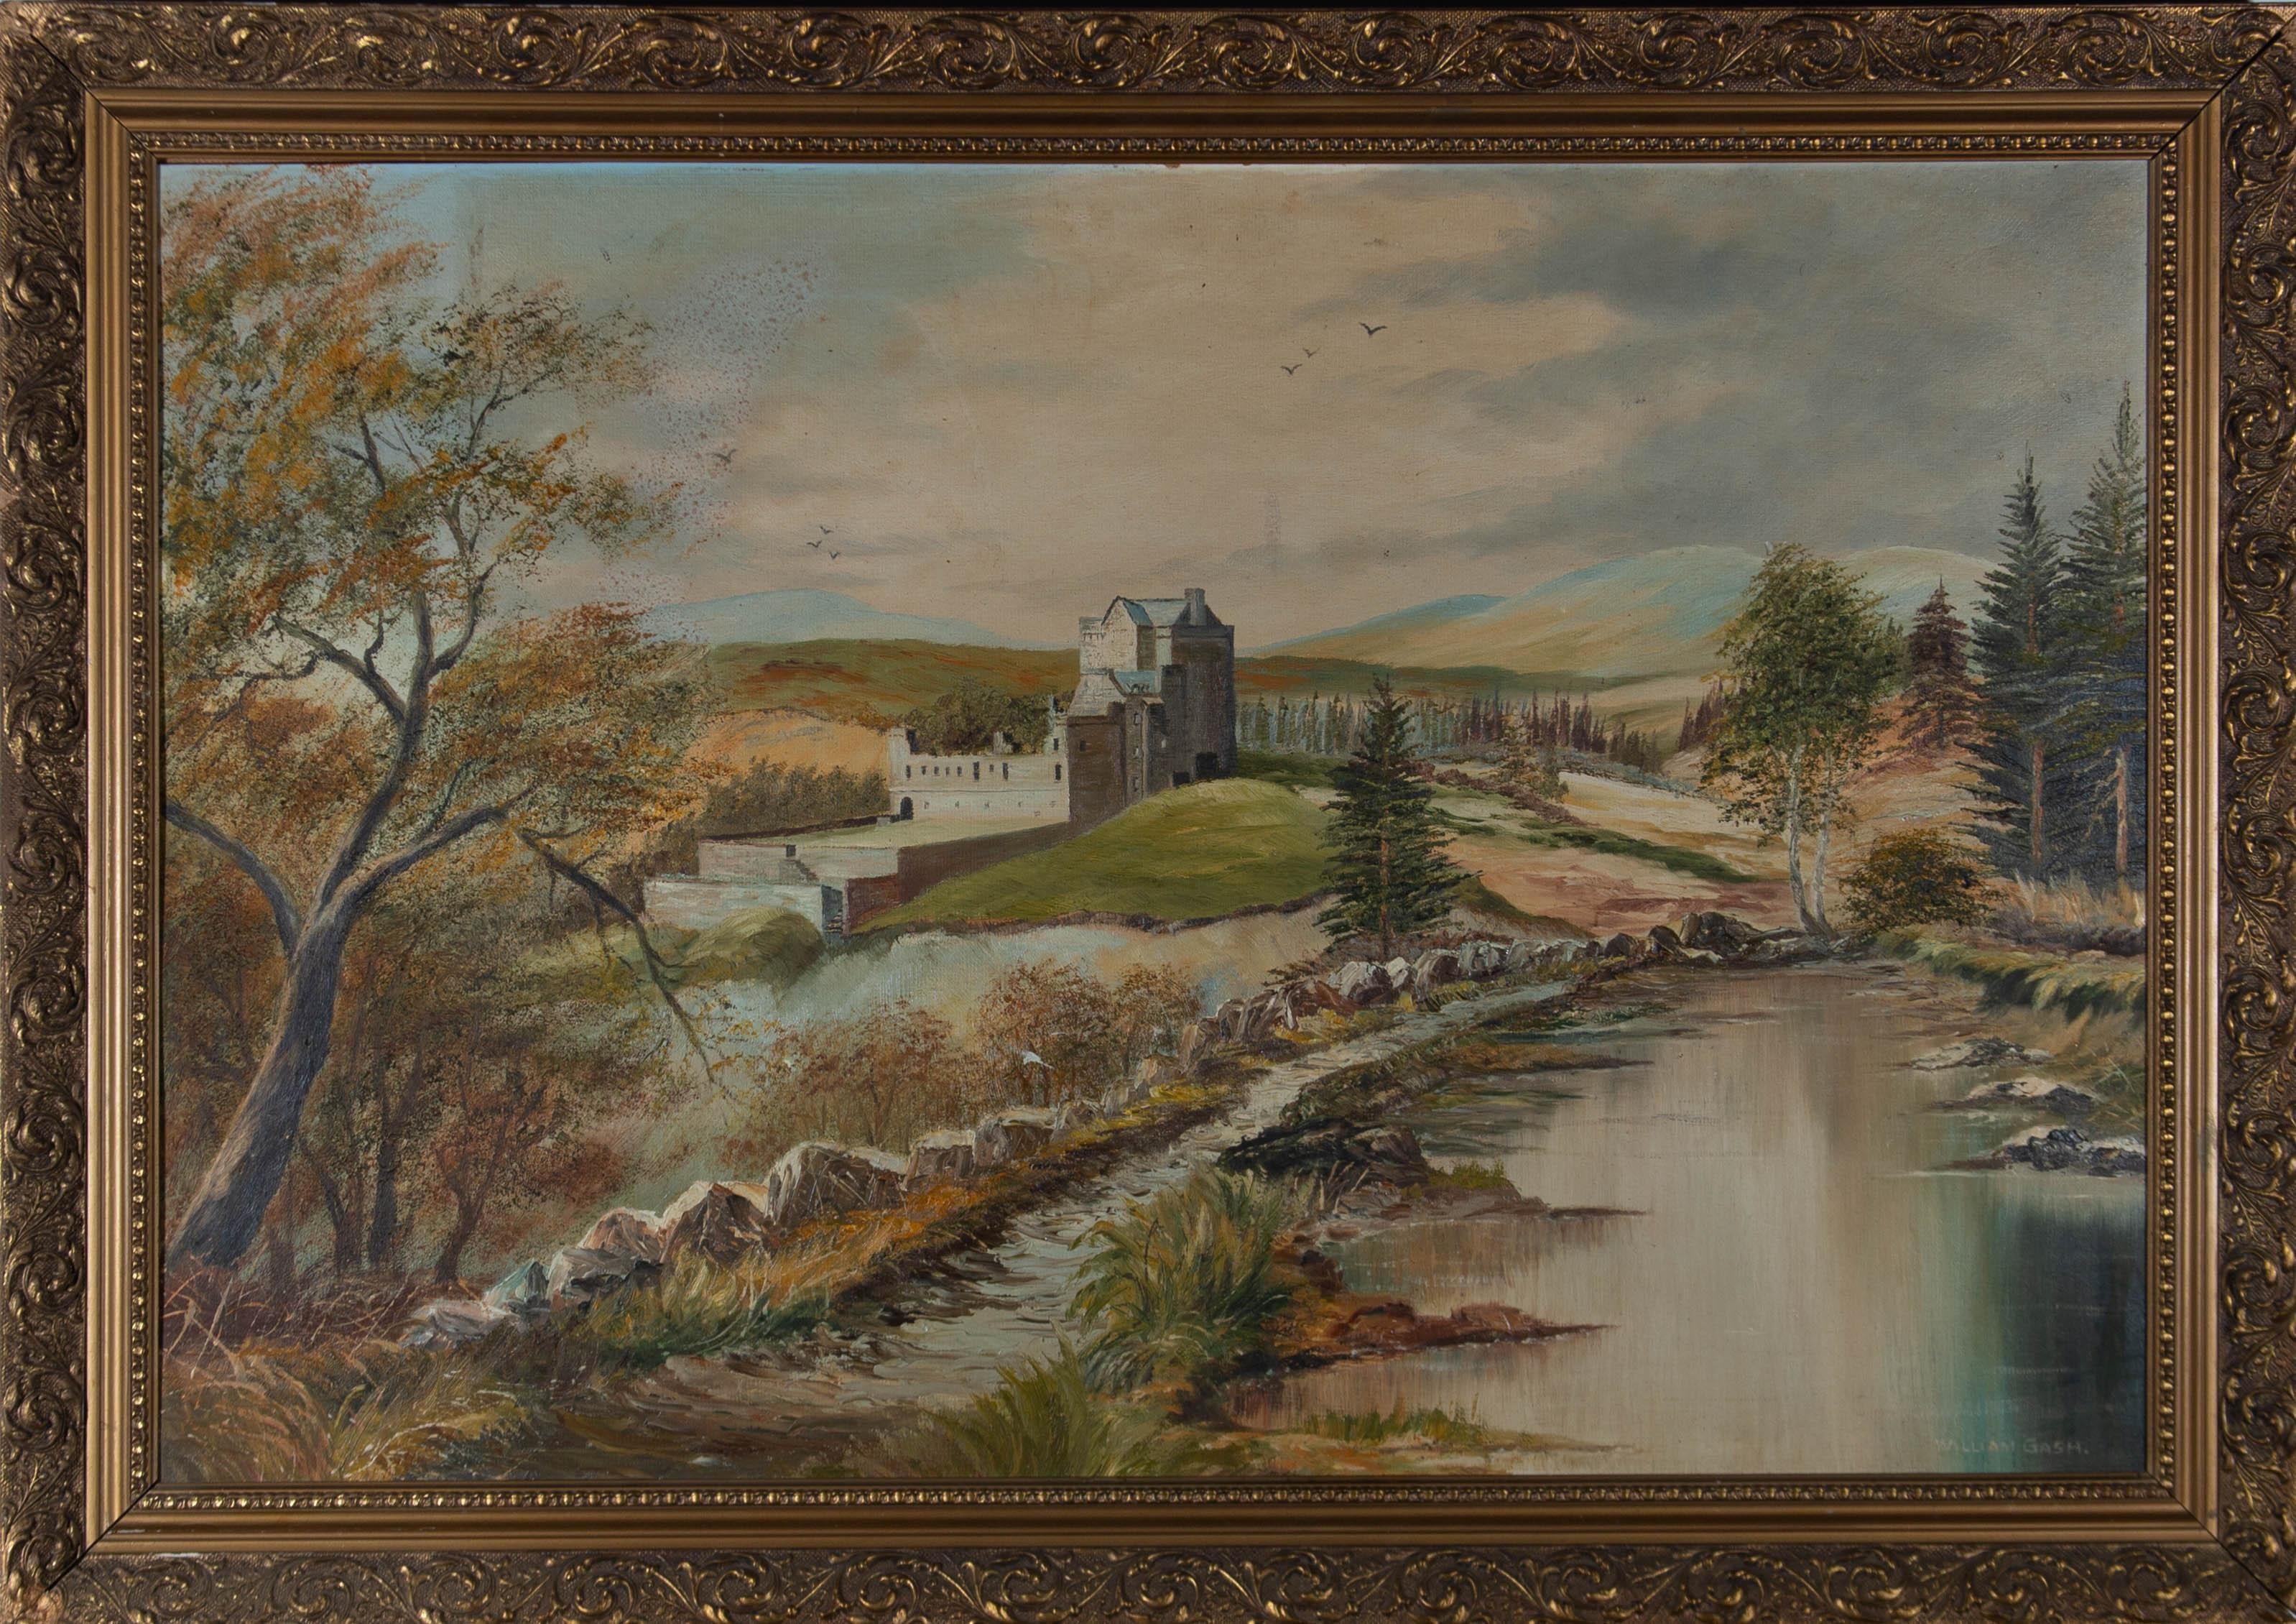 A landscape depicting a Scottish castle. Presented in an ornate gilt-effect wooden frame. Signed to the lower-right edge. On board.
